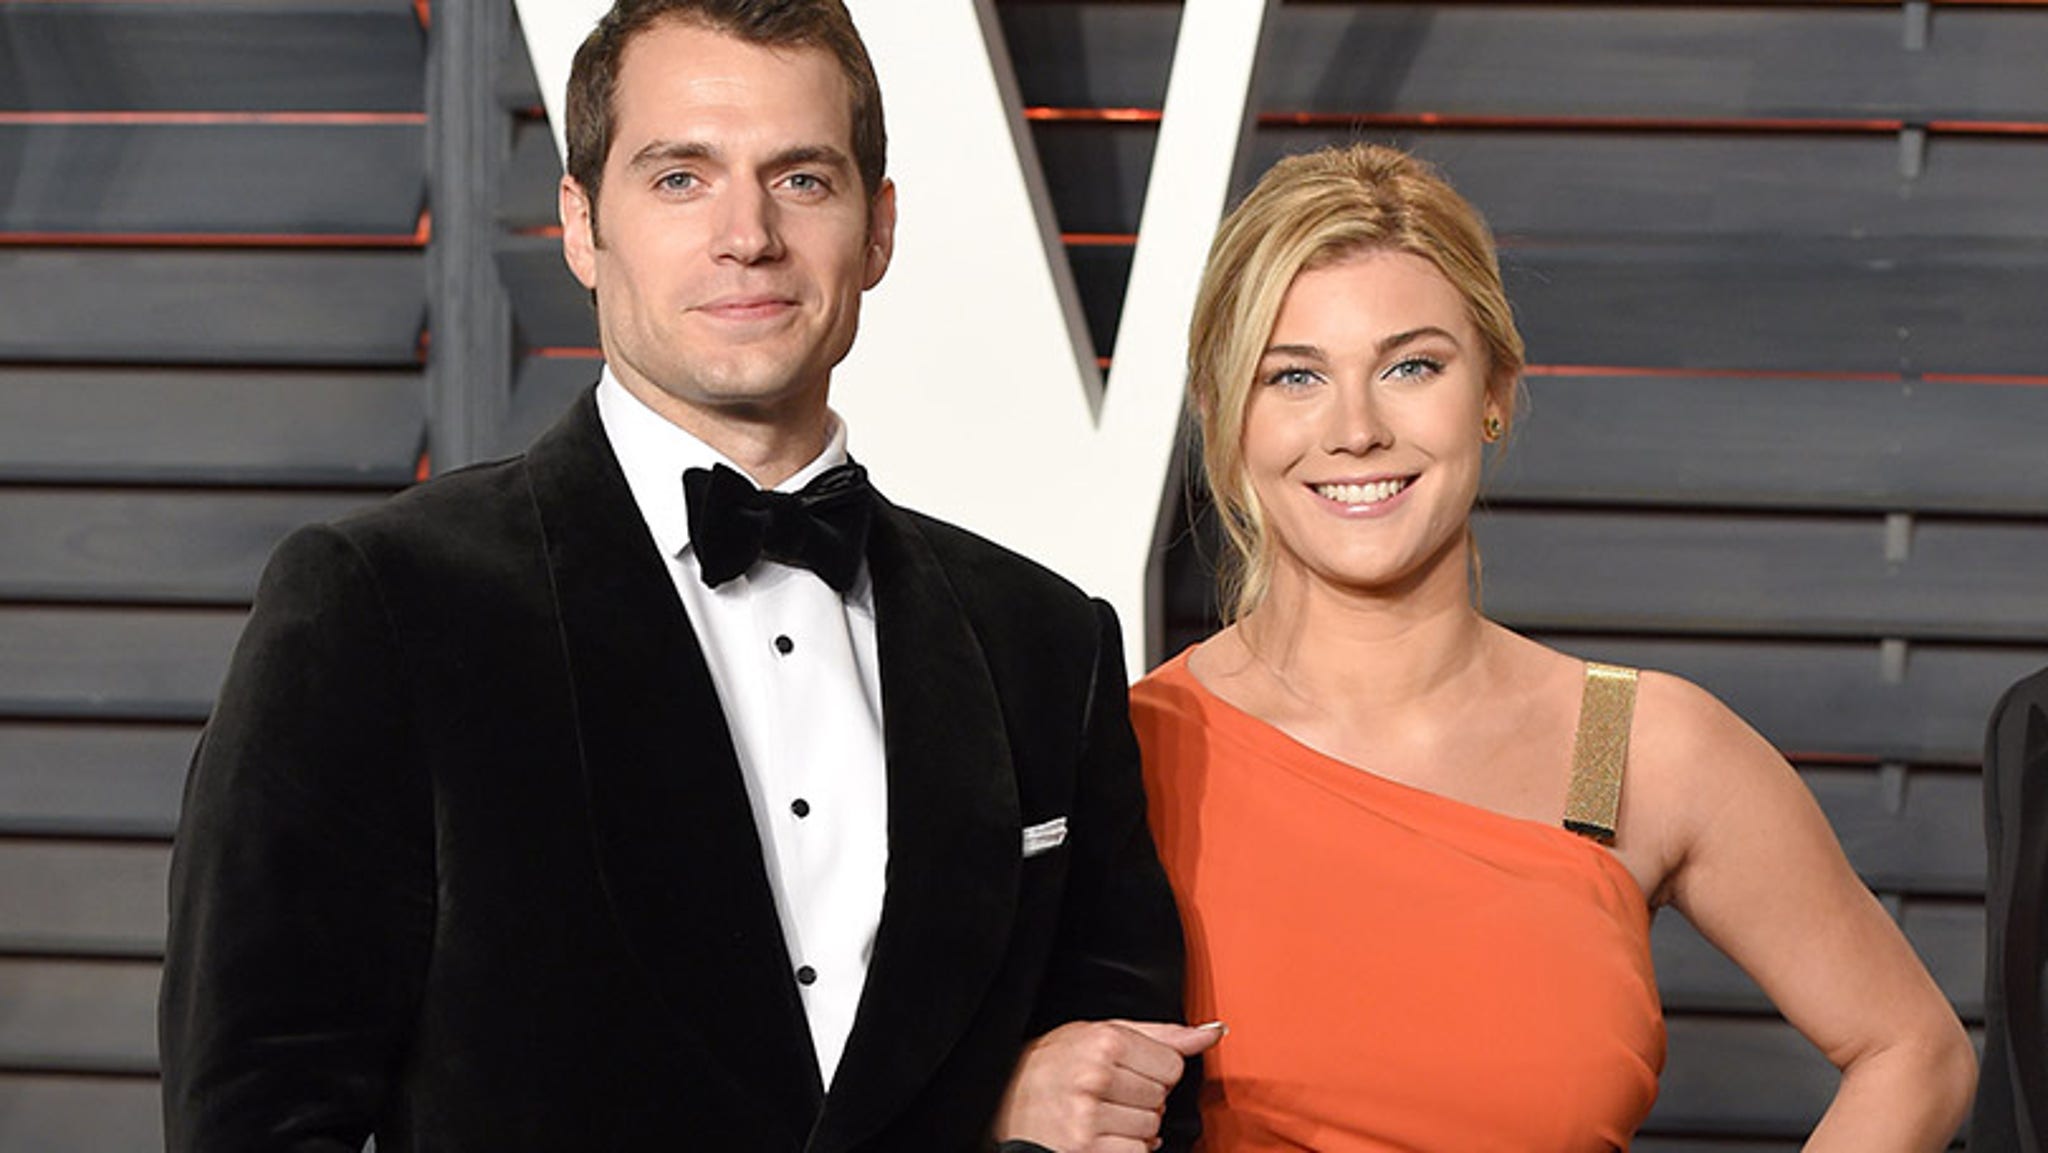 Henry Cavill, 32, and His 19-Year-Old Girlfriend Make their Red Carpet